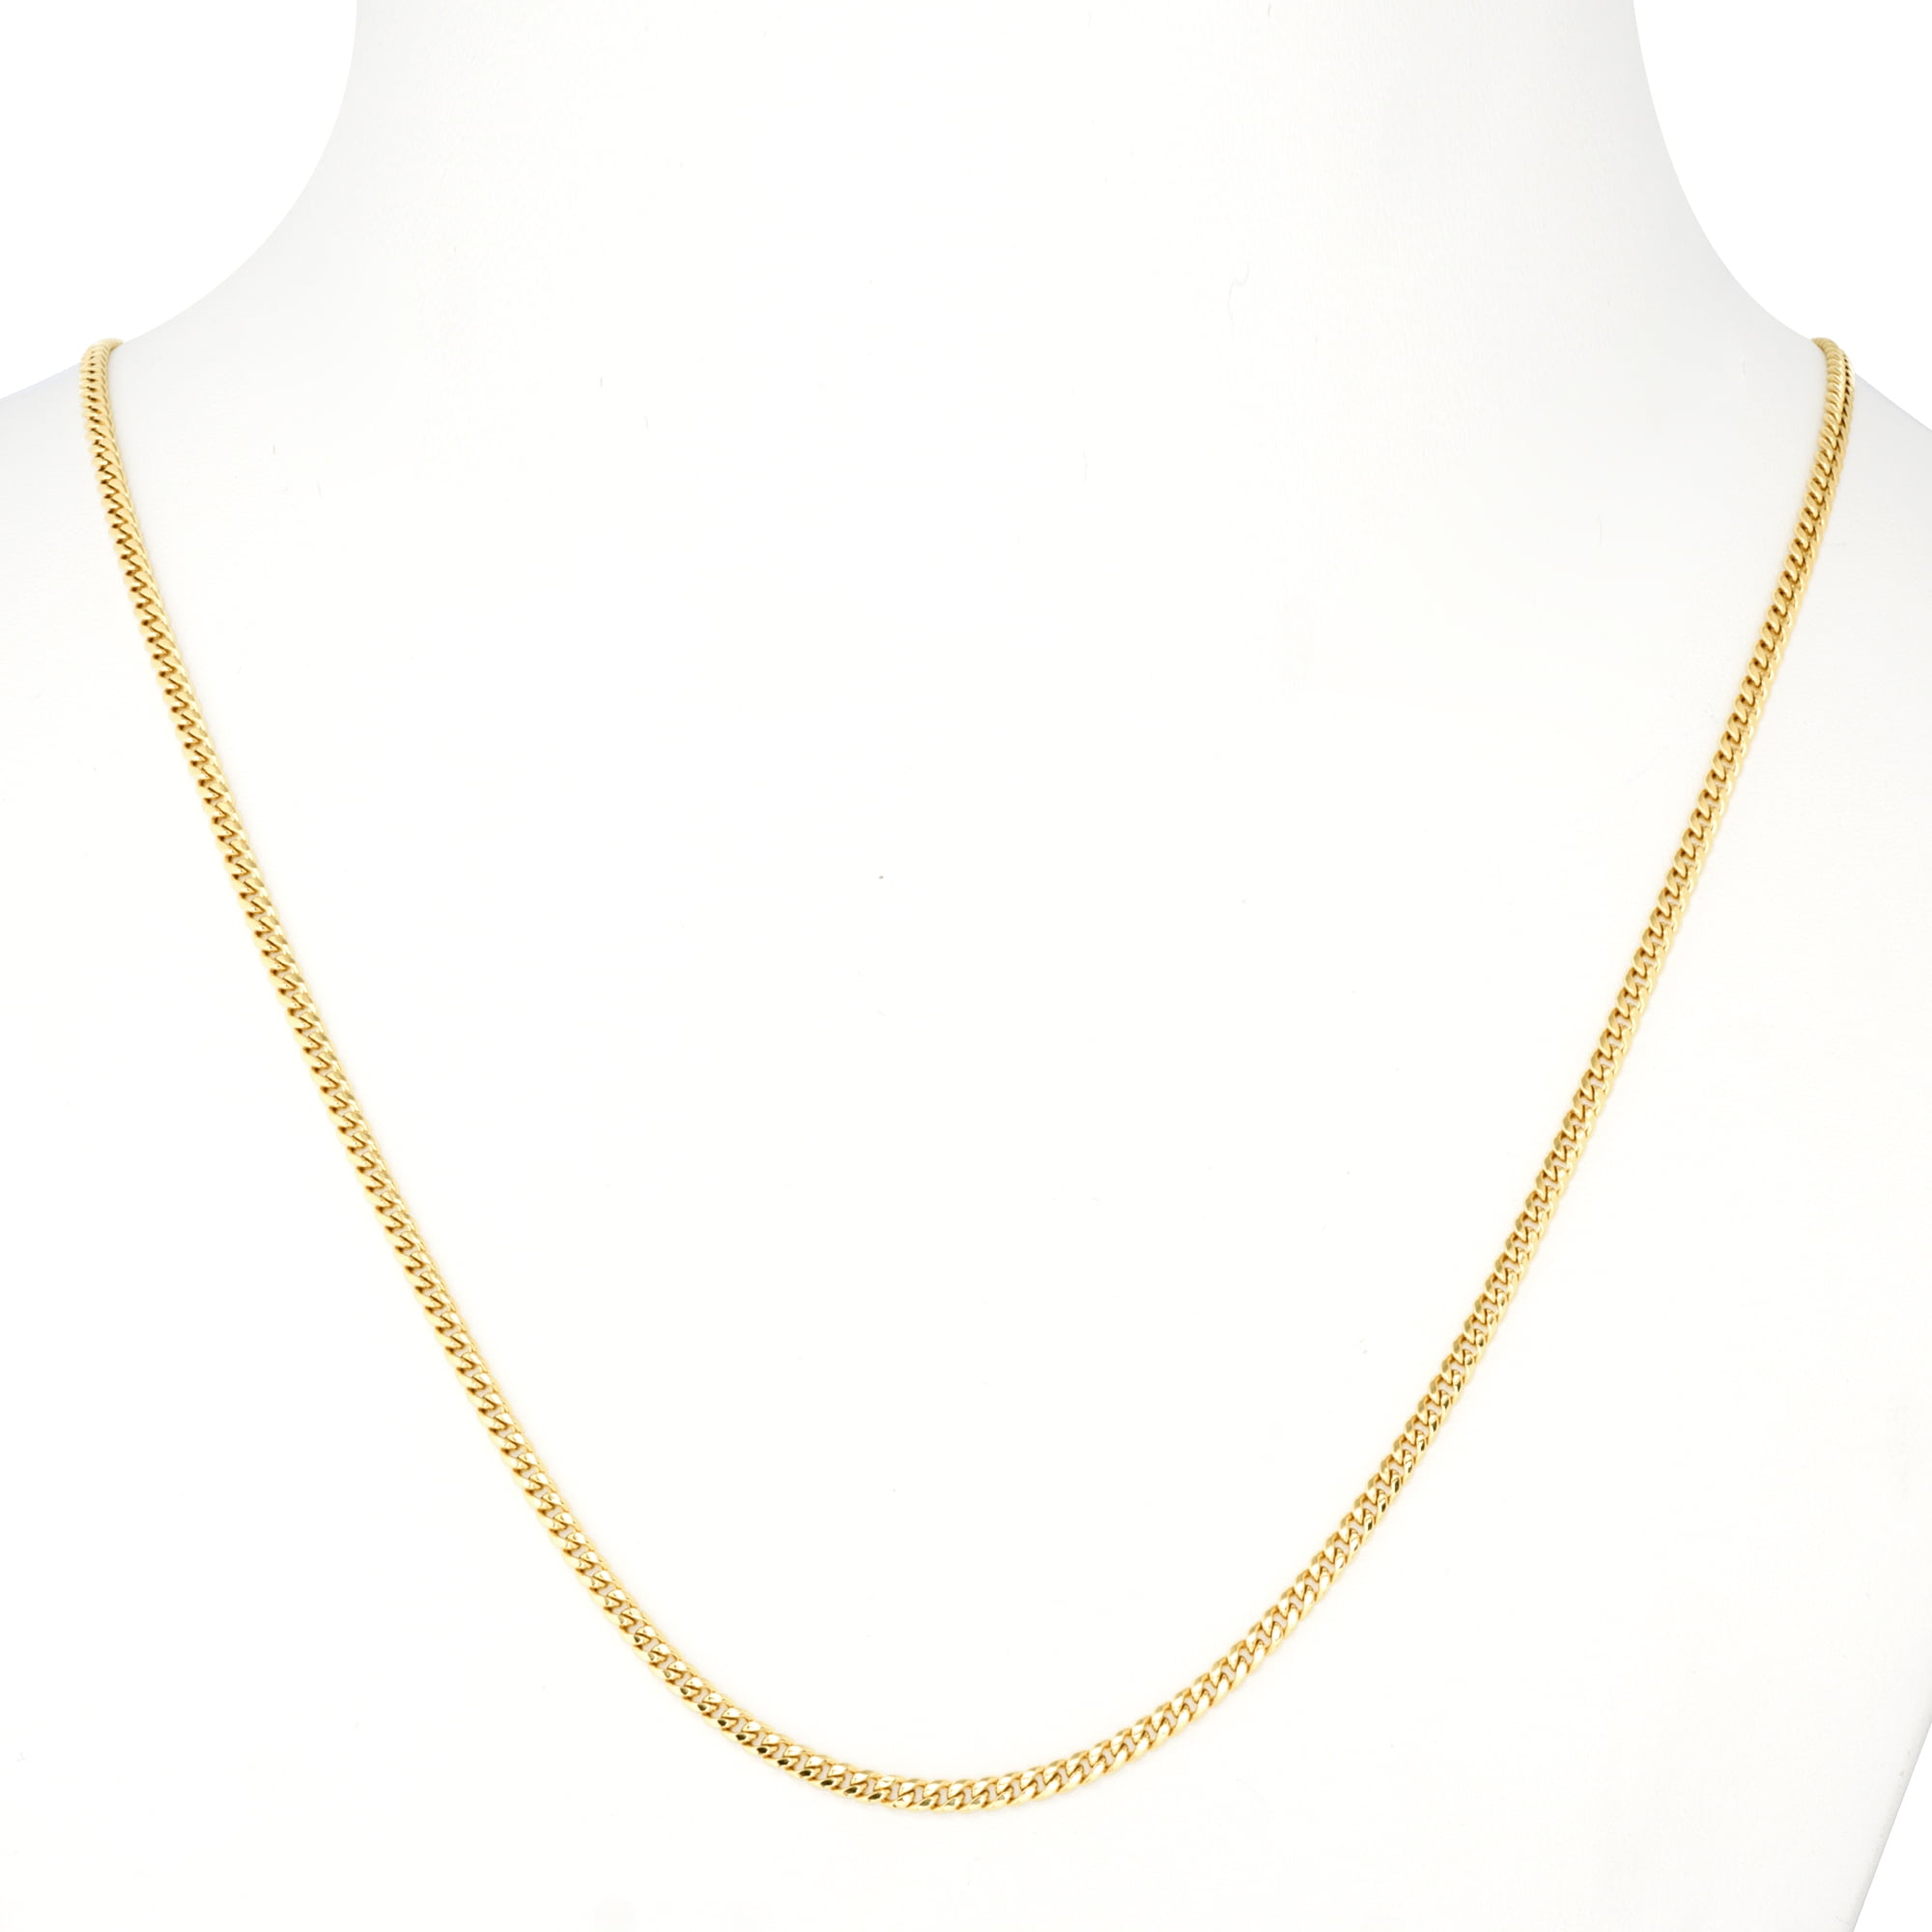 14K Yellow Gold 3mm-12.5mm Real Miami Cuban Link Necklace Chain Bracelet,  7-30